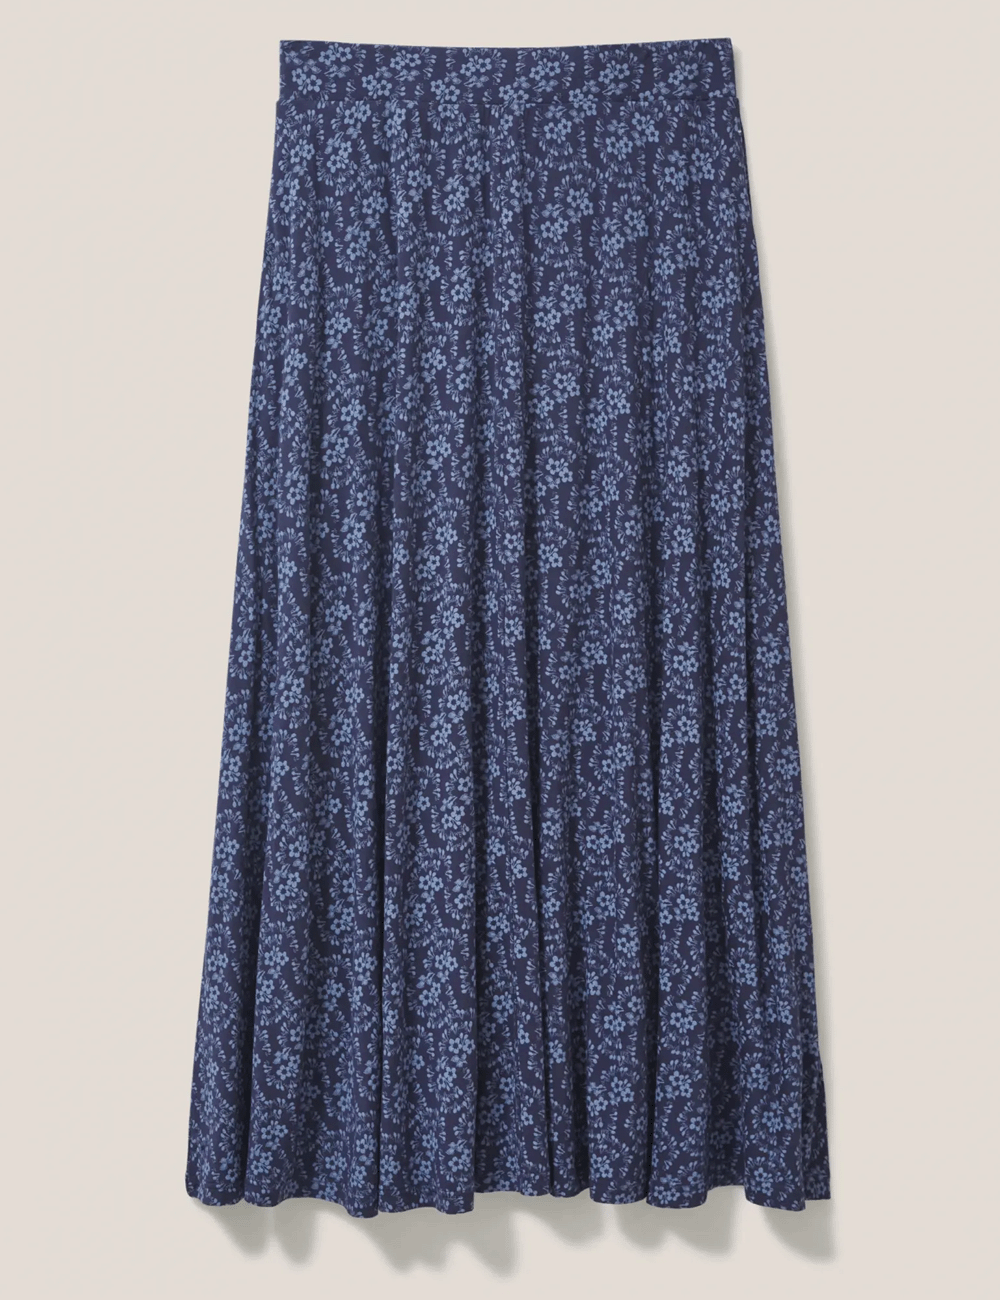 White Stuff's Jada Maxi Skirt in Navy Print on a grey background